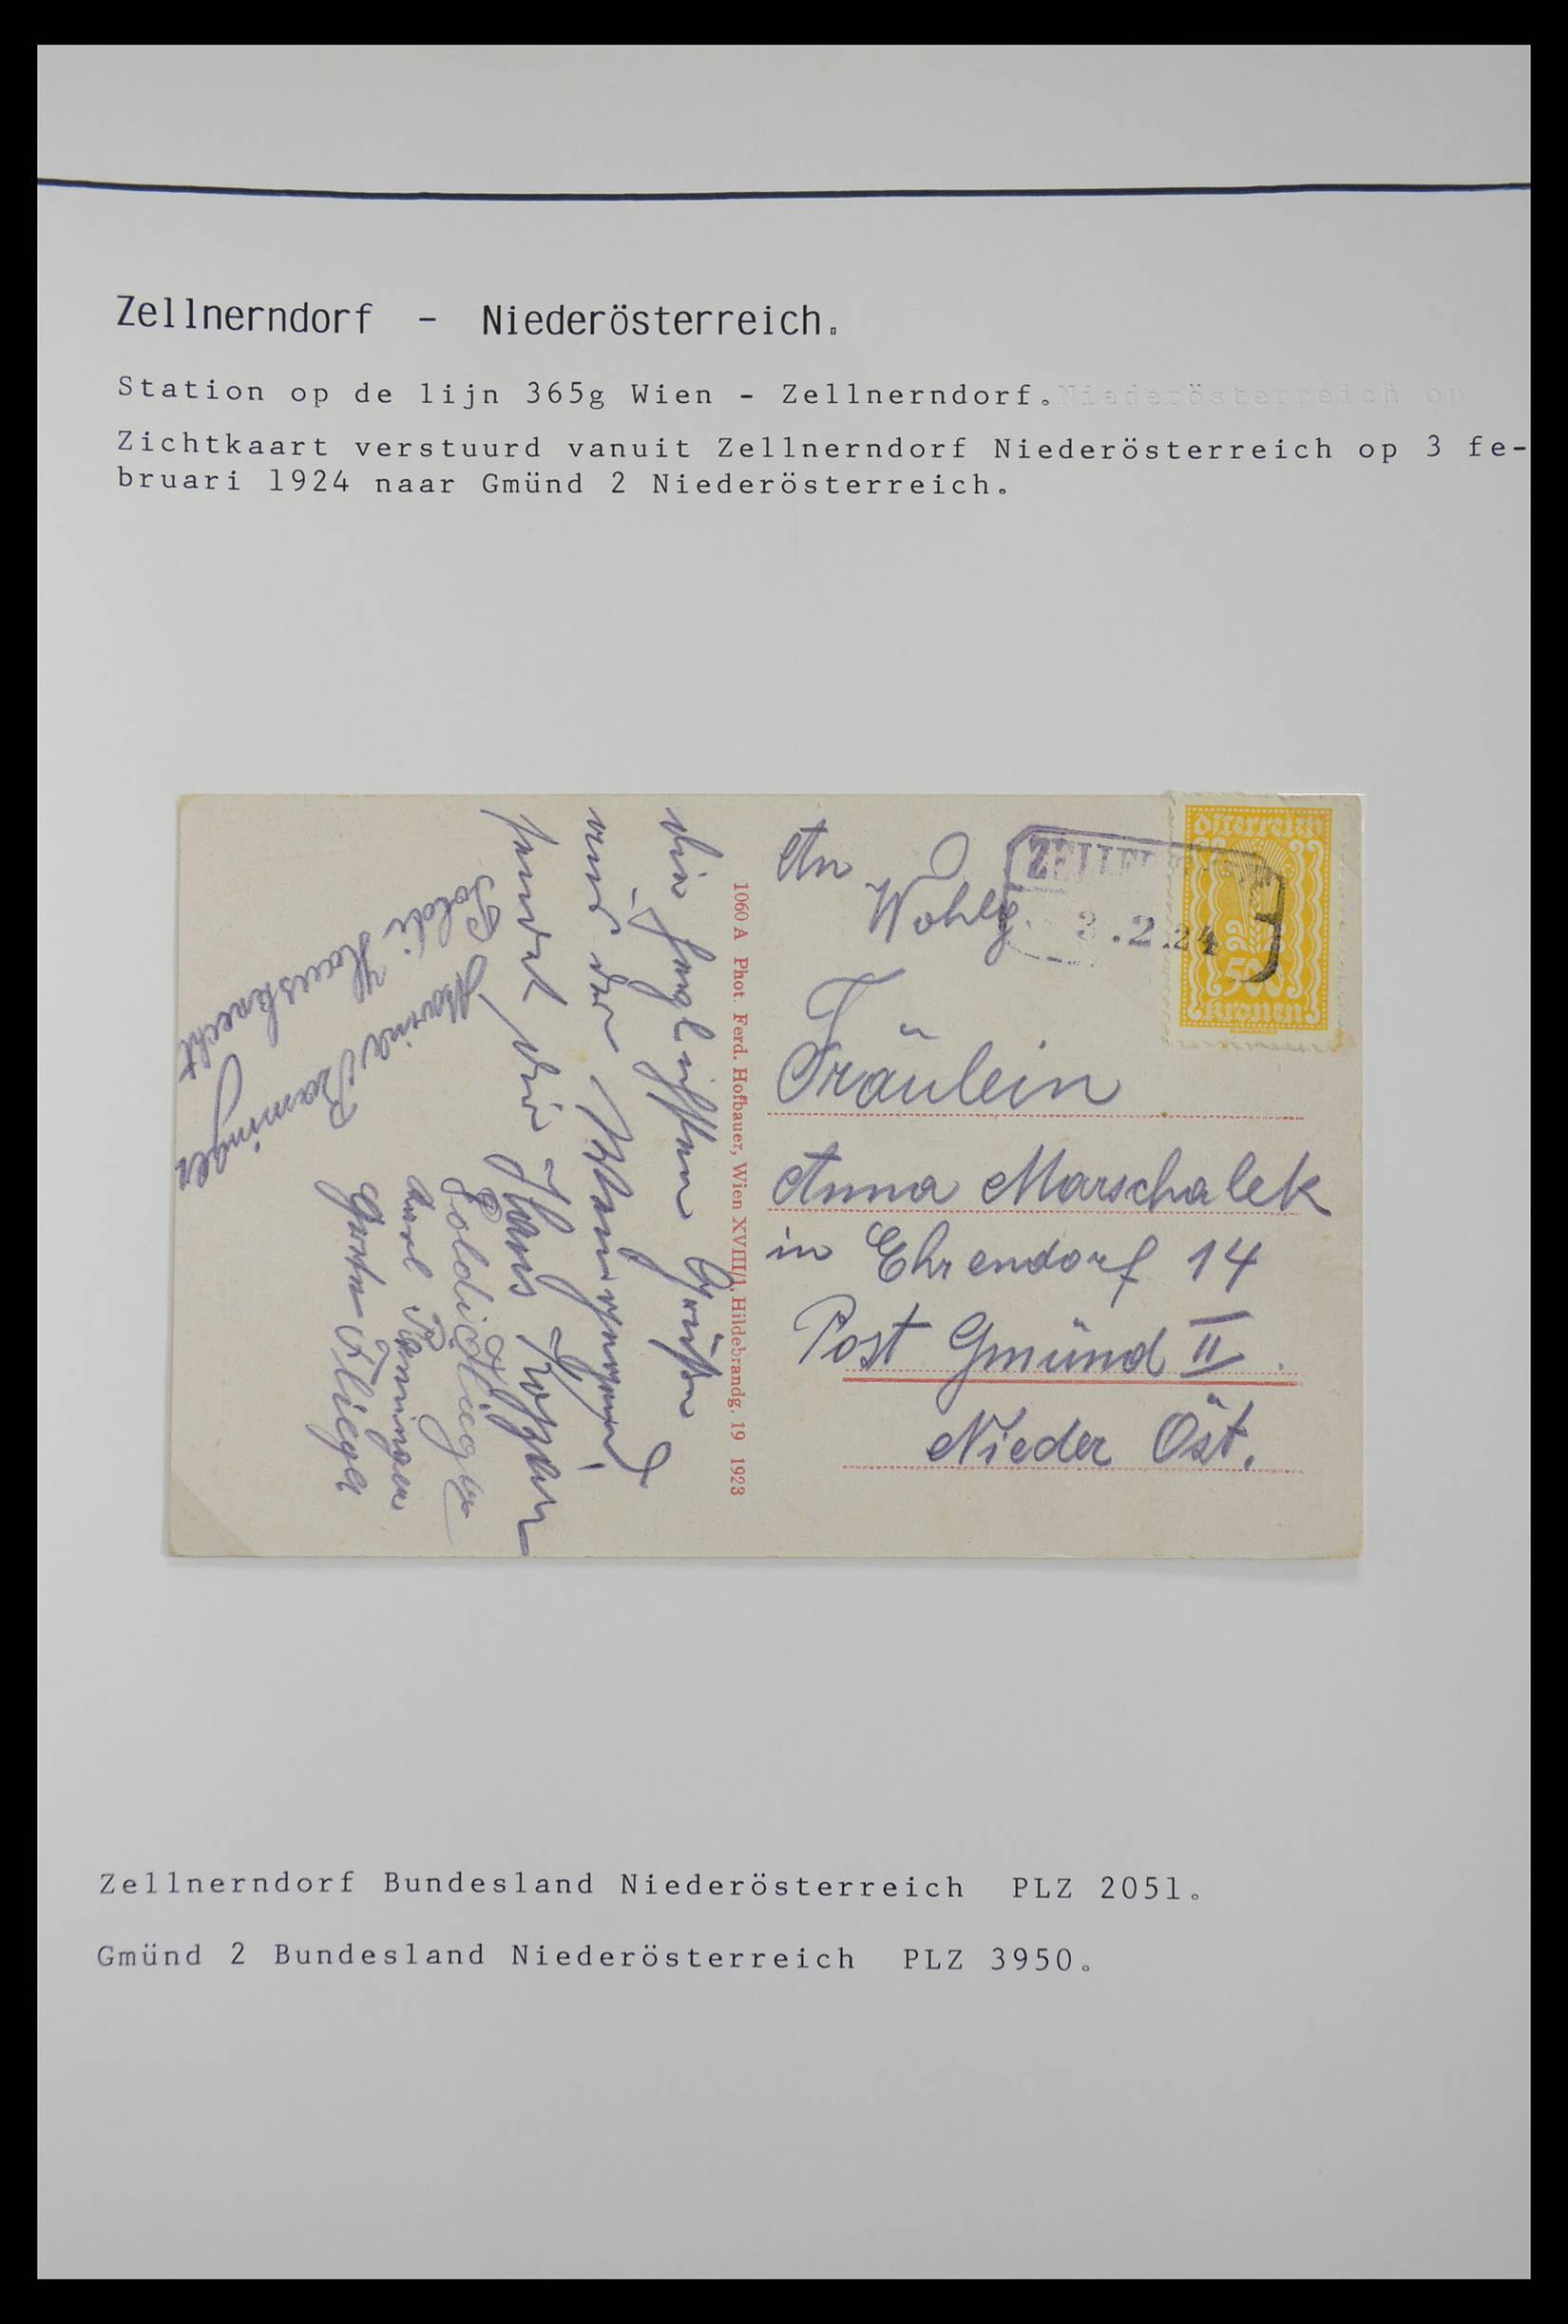 27524 1048 - 27524 Austria railroad post and station cancels.